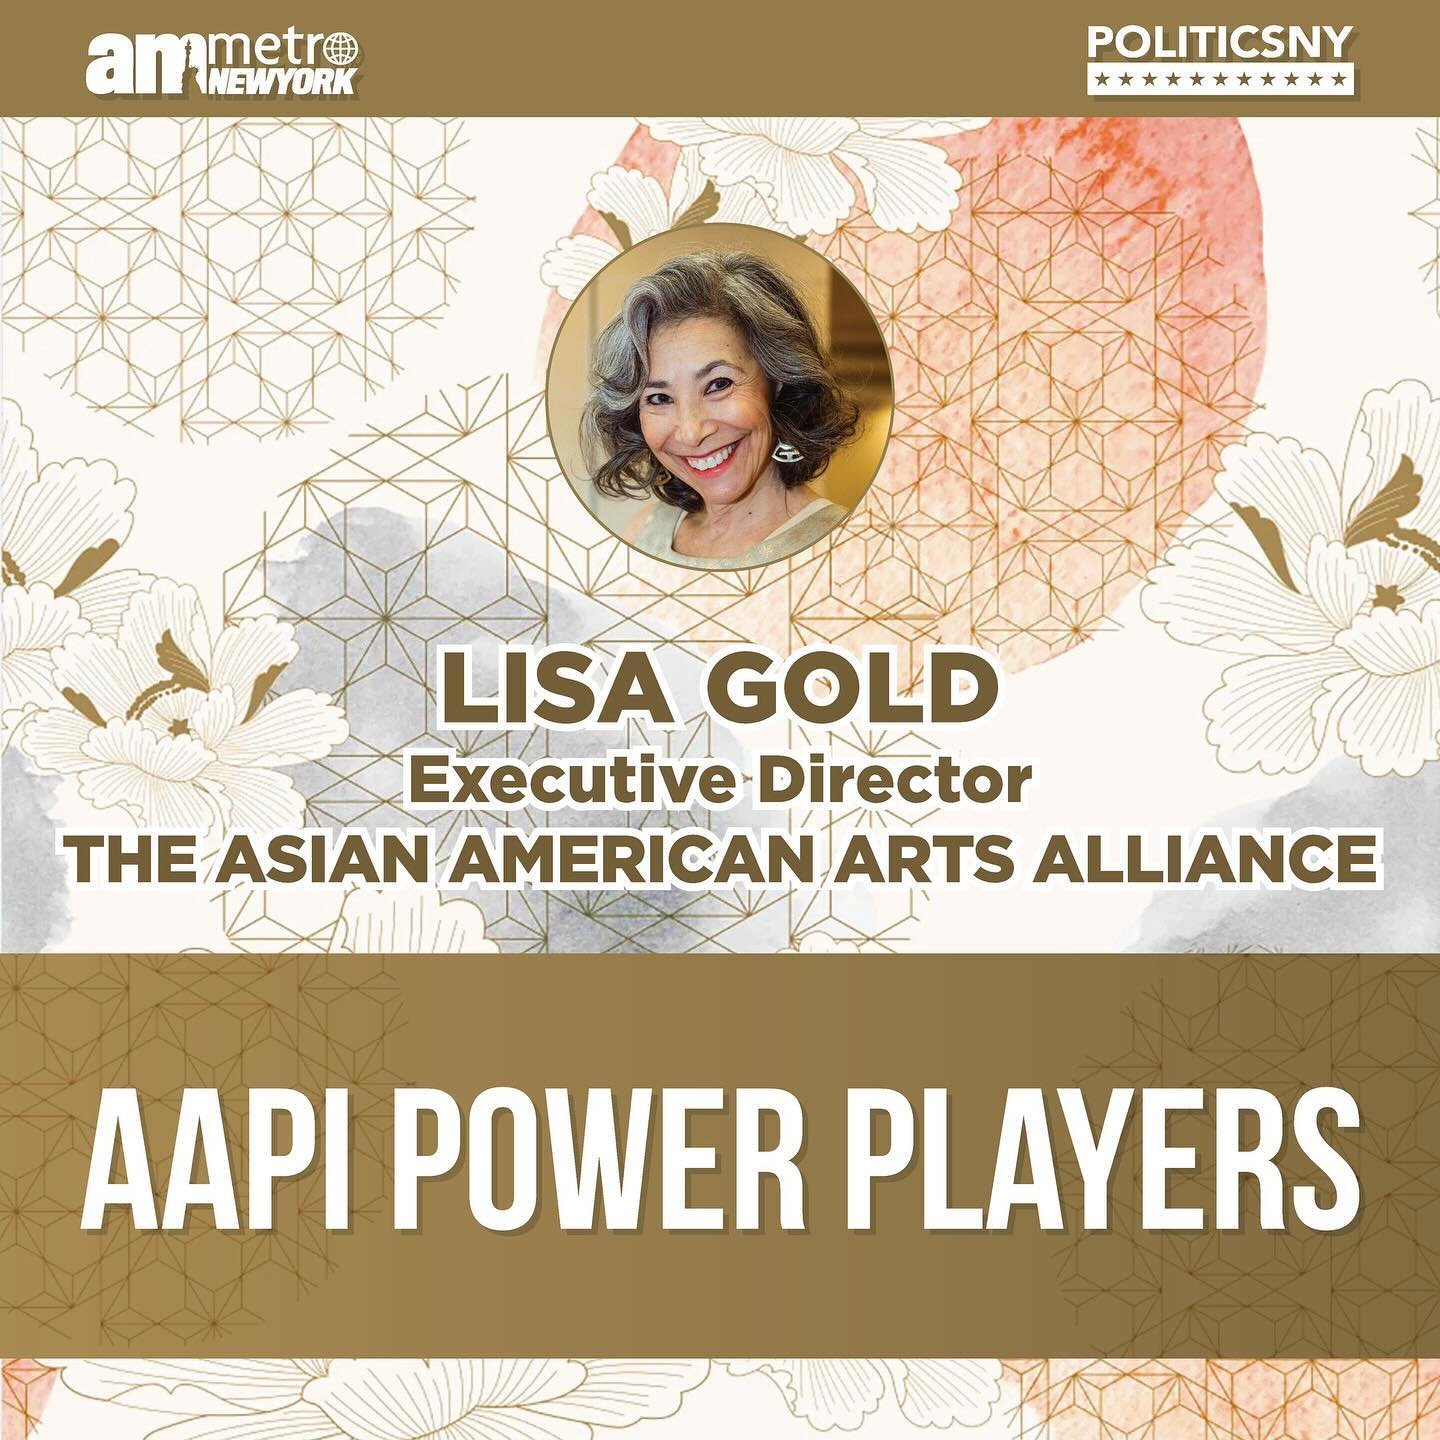 FROM OUR FRIENDS: Congrats to Lisa Gold @lisajgold , Executive Director of @aaartsalliance , our arts advocacy organization honoree for Pan Asian Rep's upcoming 47th Art &amp; Action Benefit Dinner! Lisa was named as a @politicsnynews and @amnewyork 